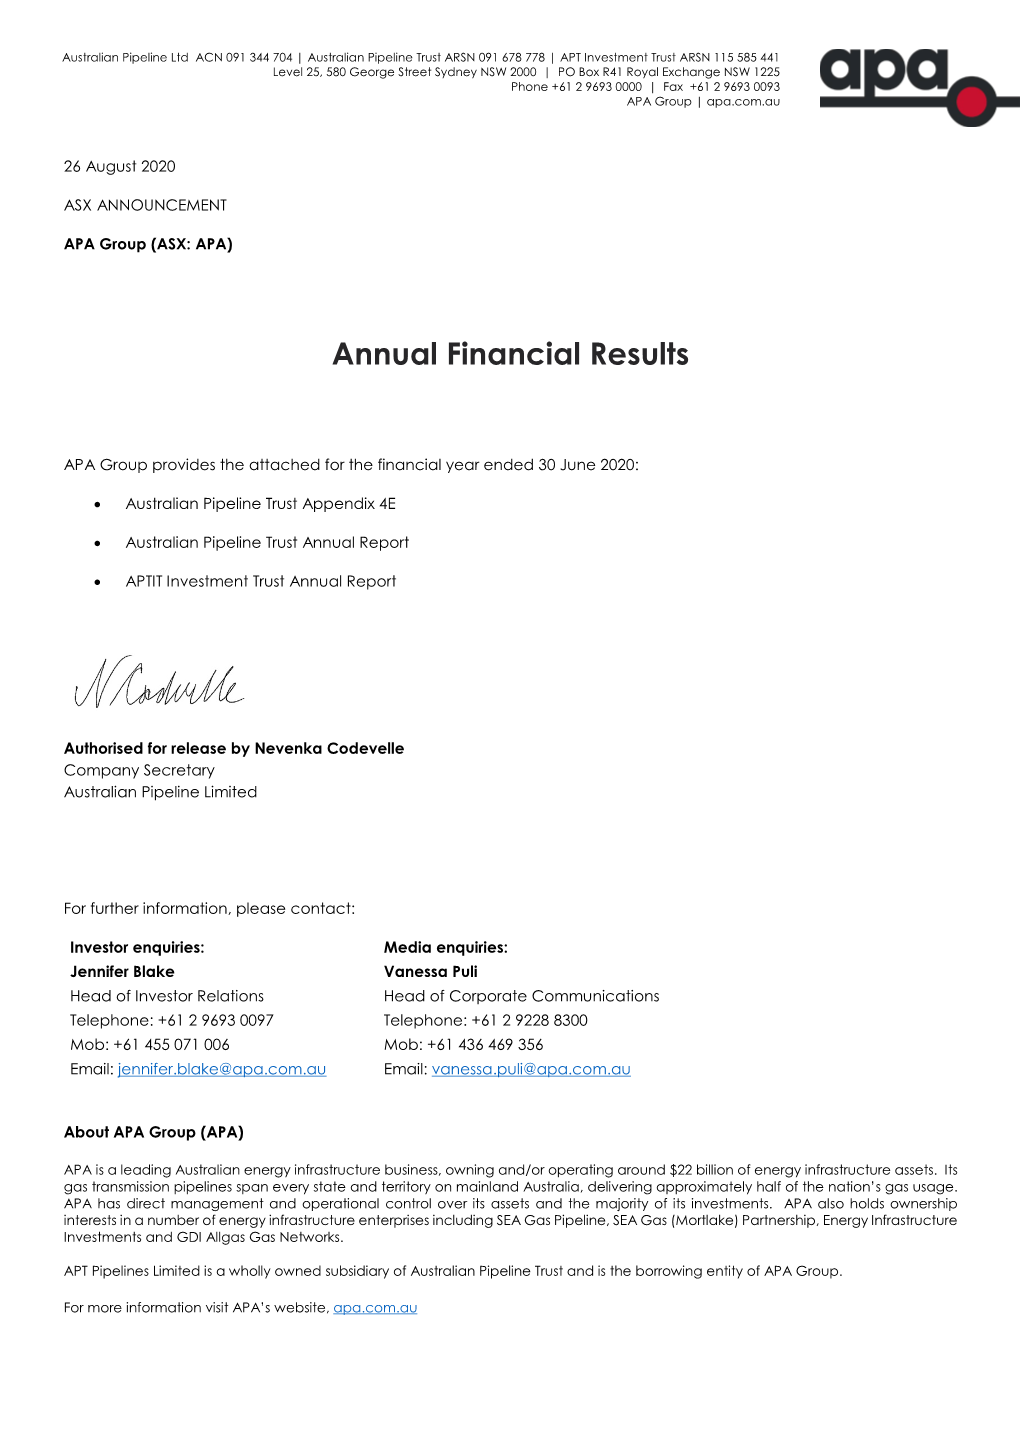 Annual Financial Results